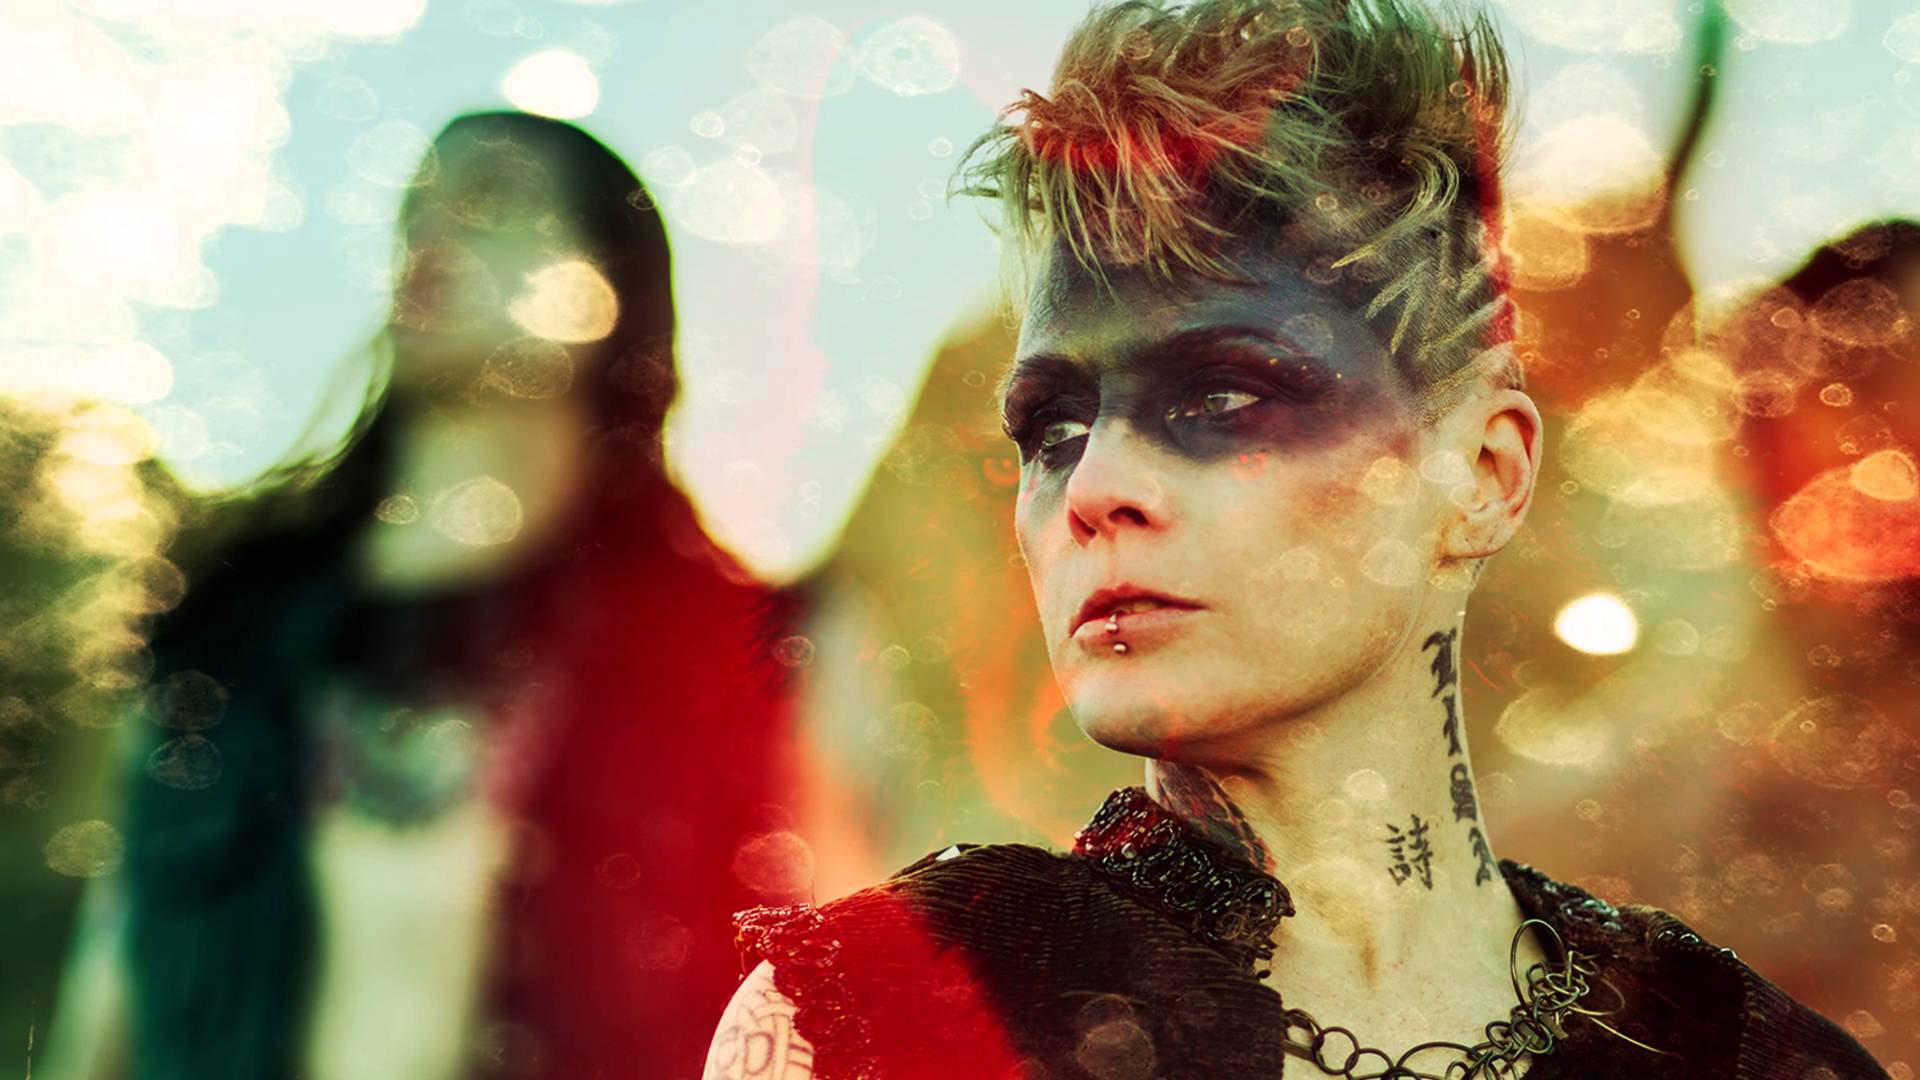 Otep Backgrounds, Compatible - PC, Mobile, Gadgets| 1920x1080 px